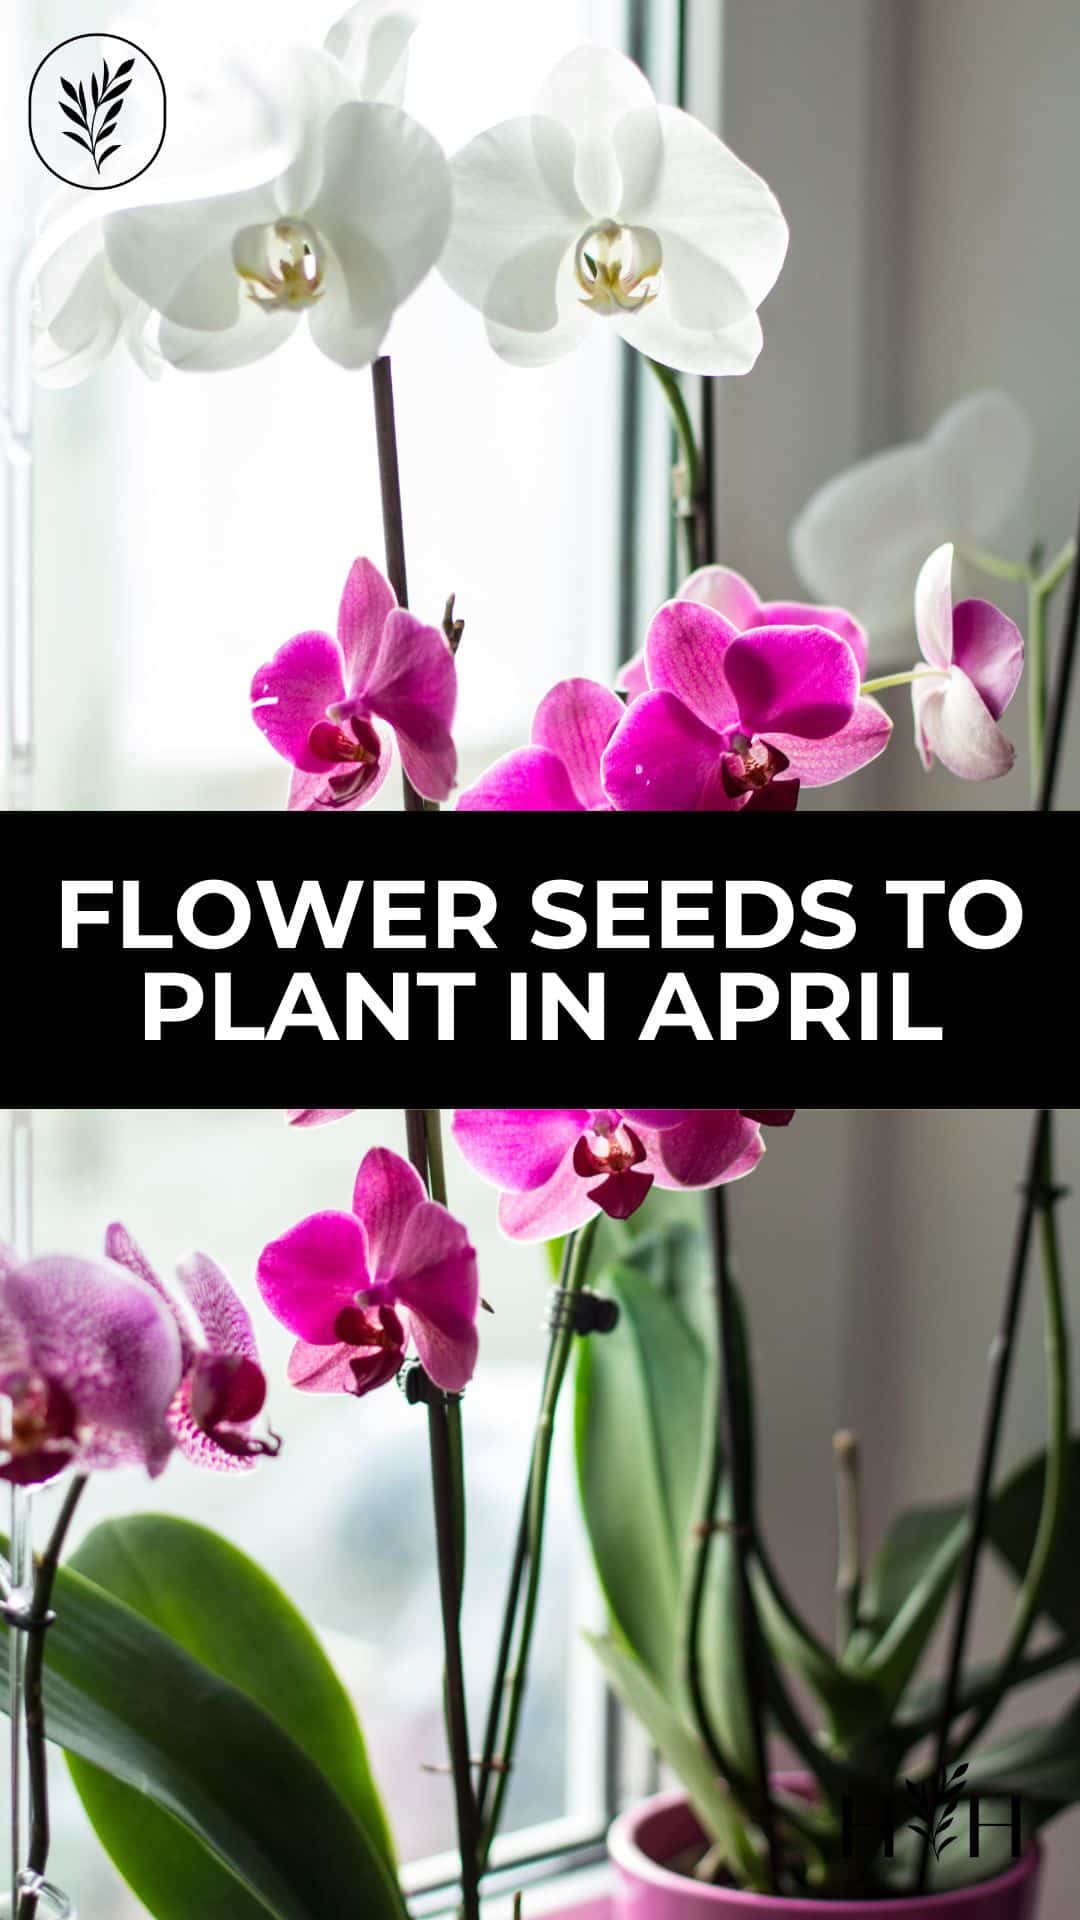 Flower seeds to plant in april via @home4theharvest